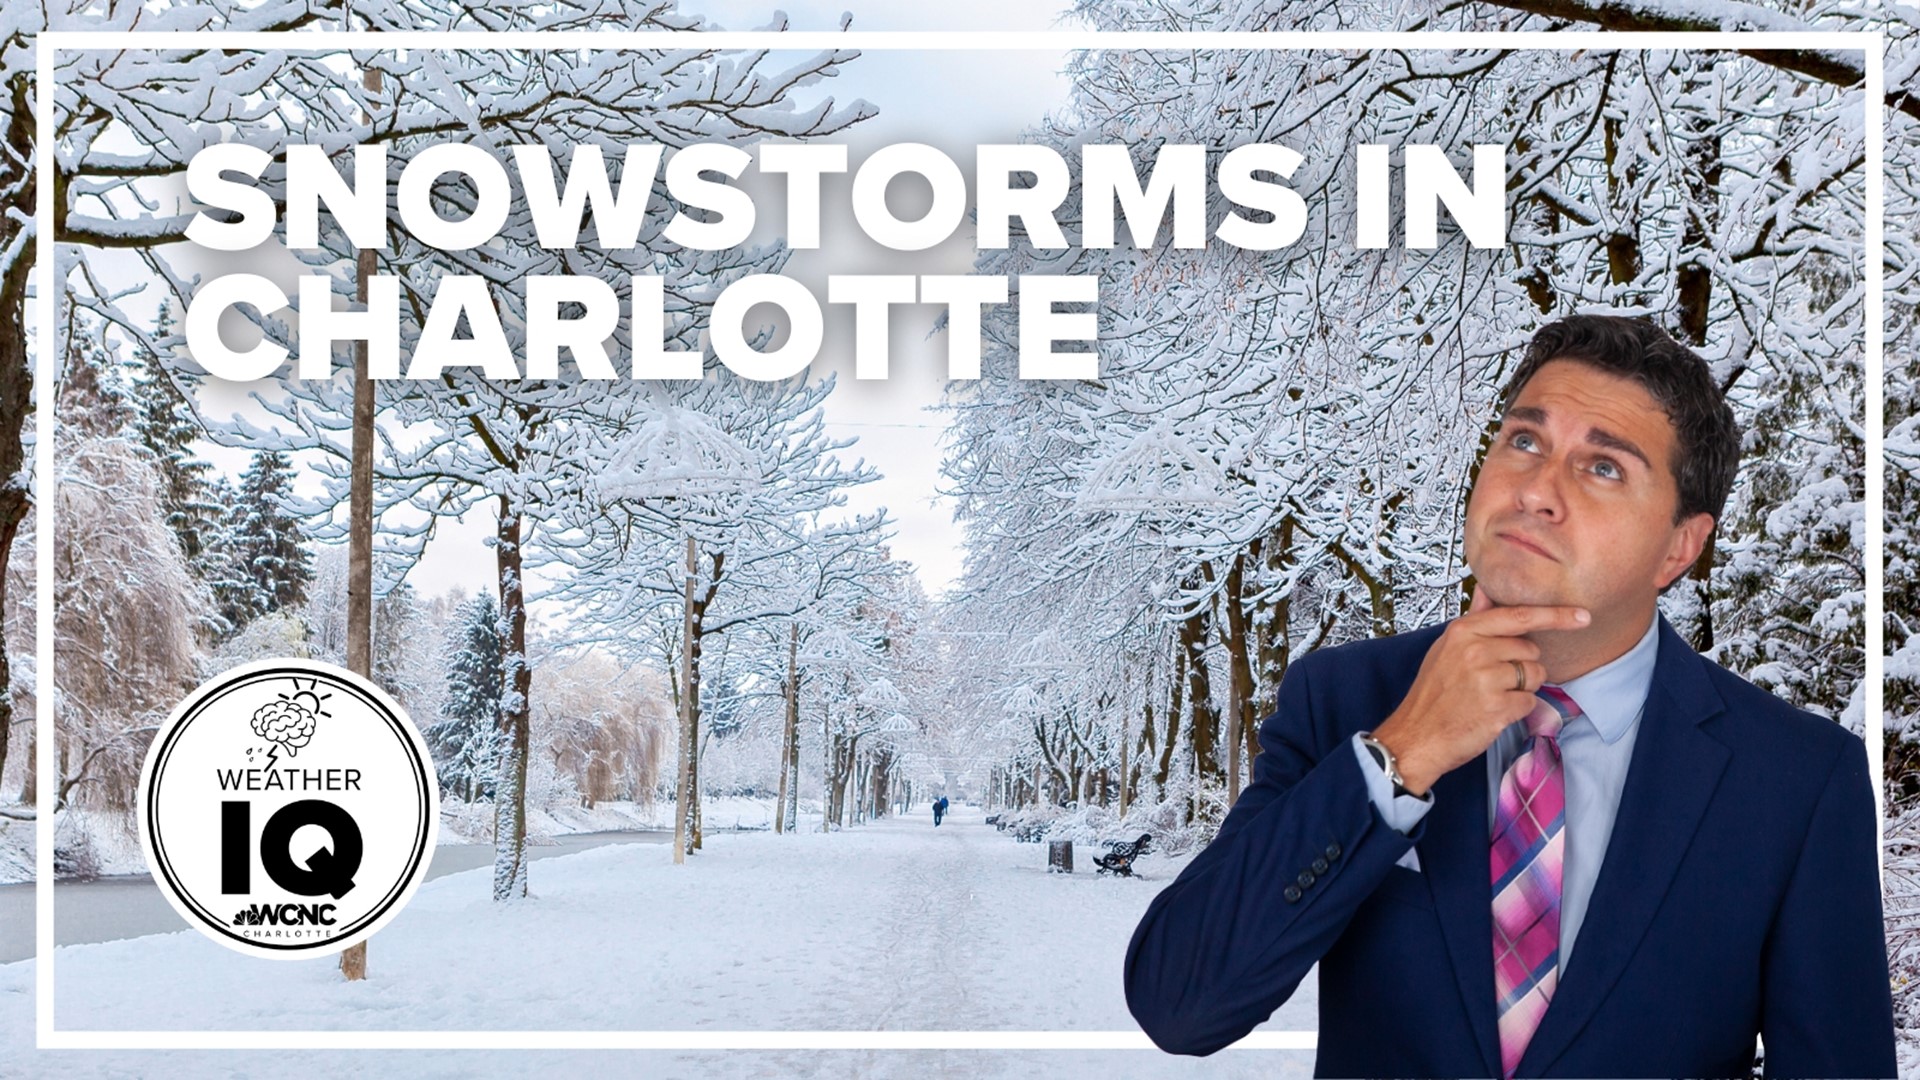 Big snow storms are not common in Charlotte.